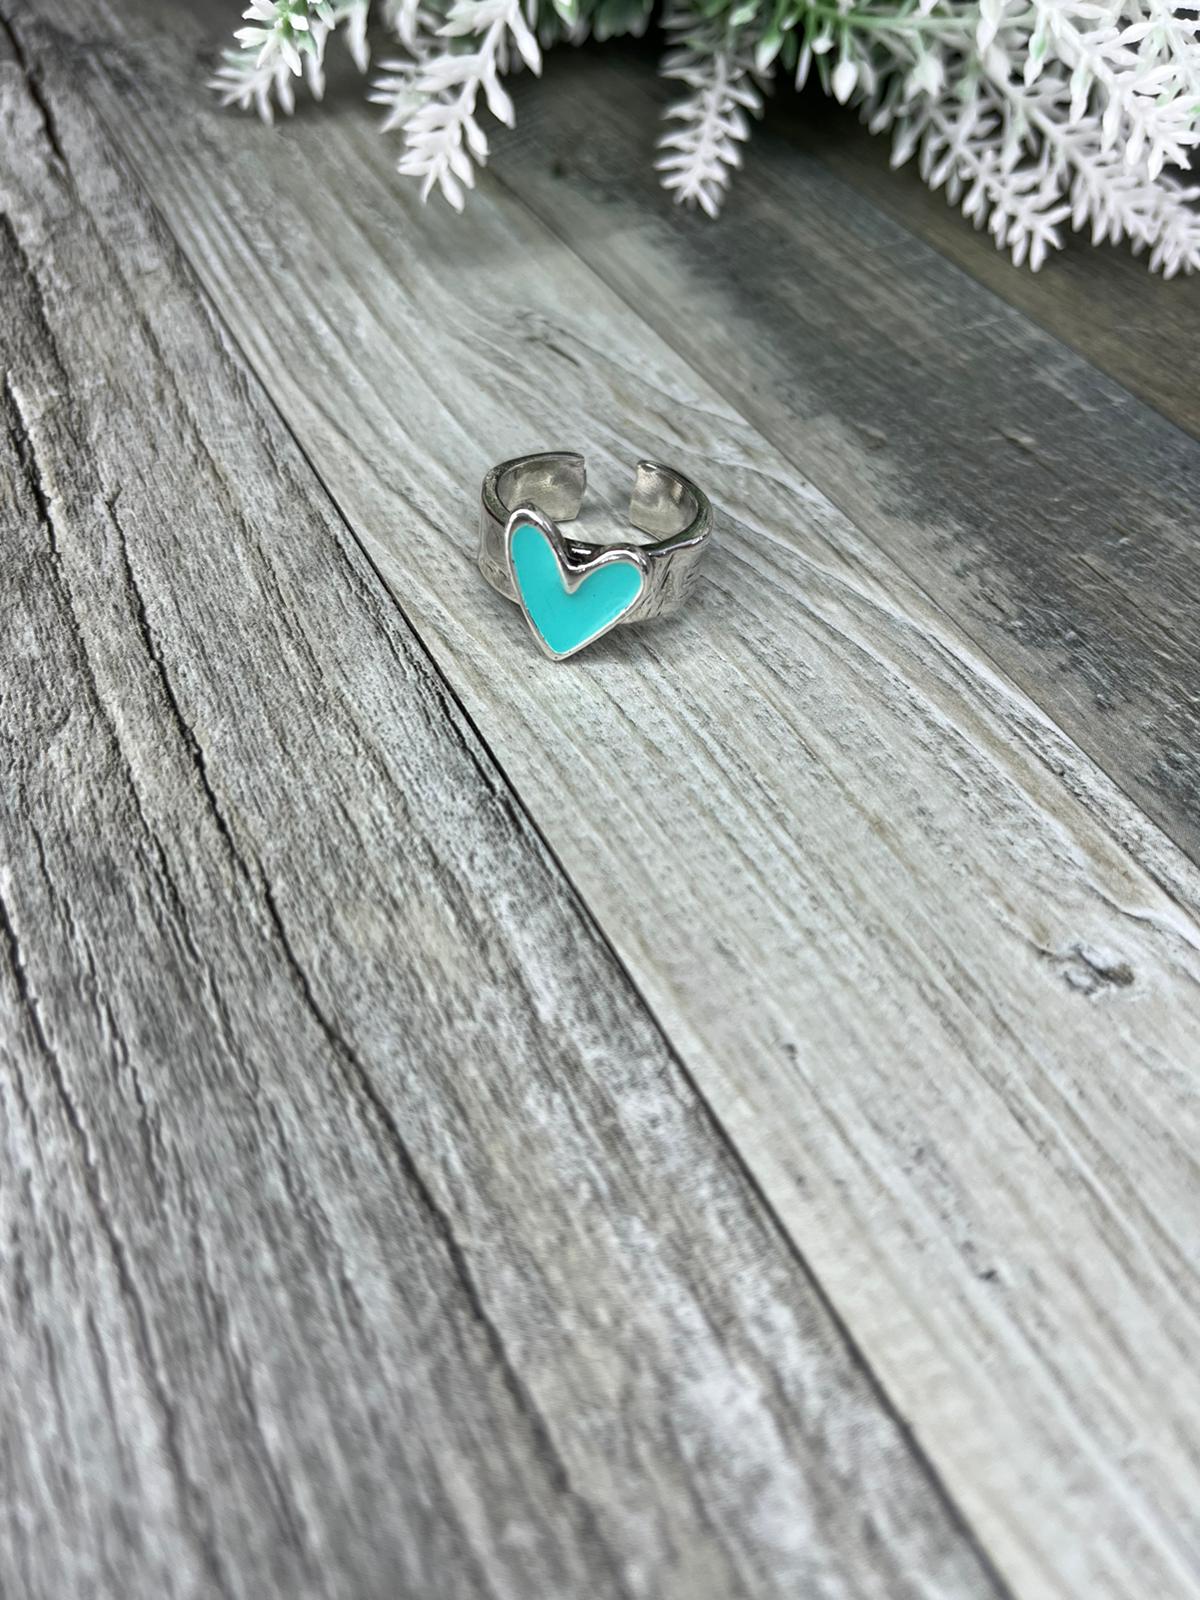 "Turquoise Heart Ring"